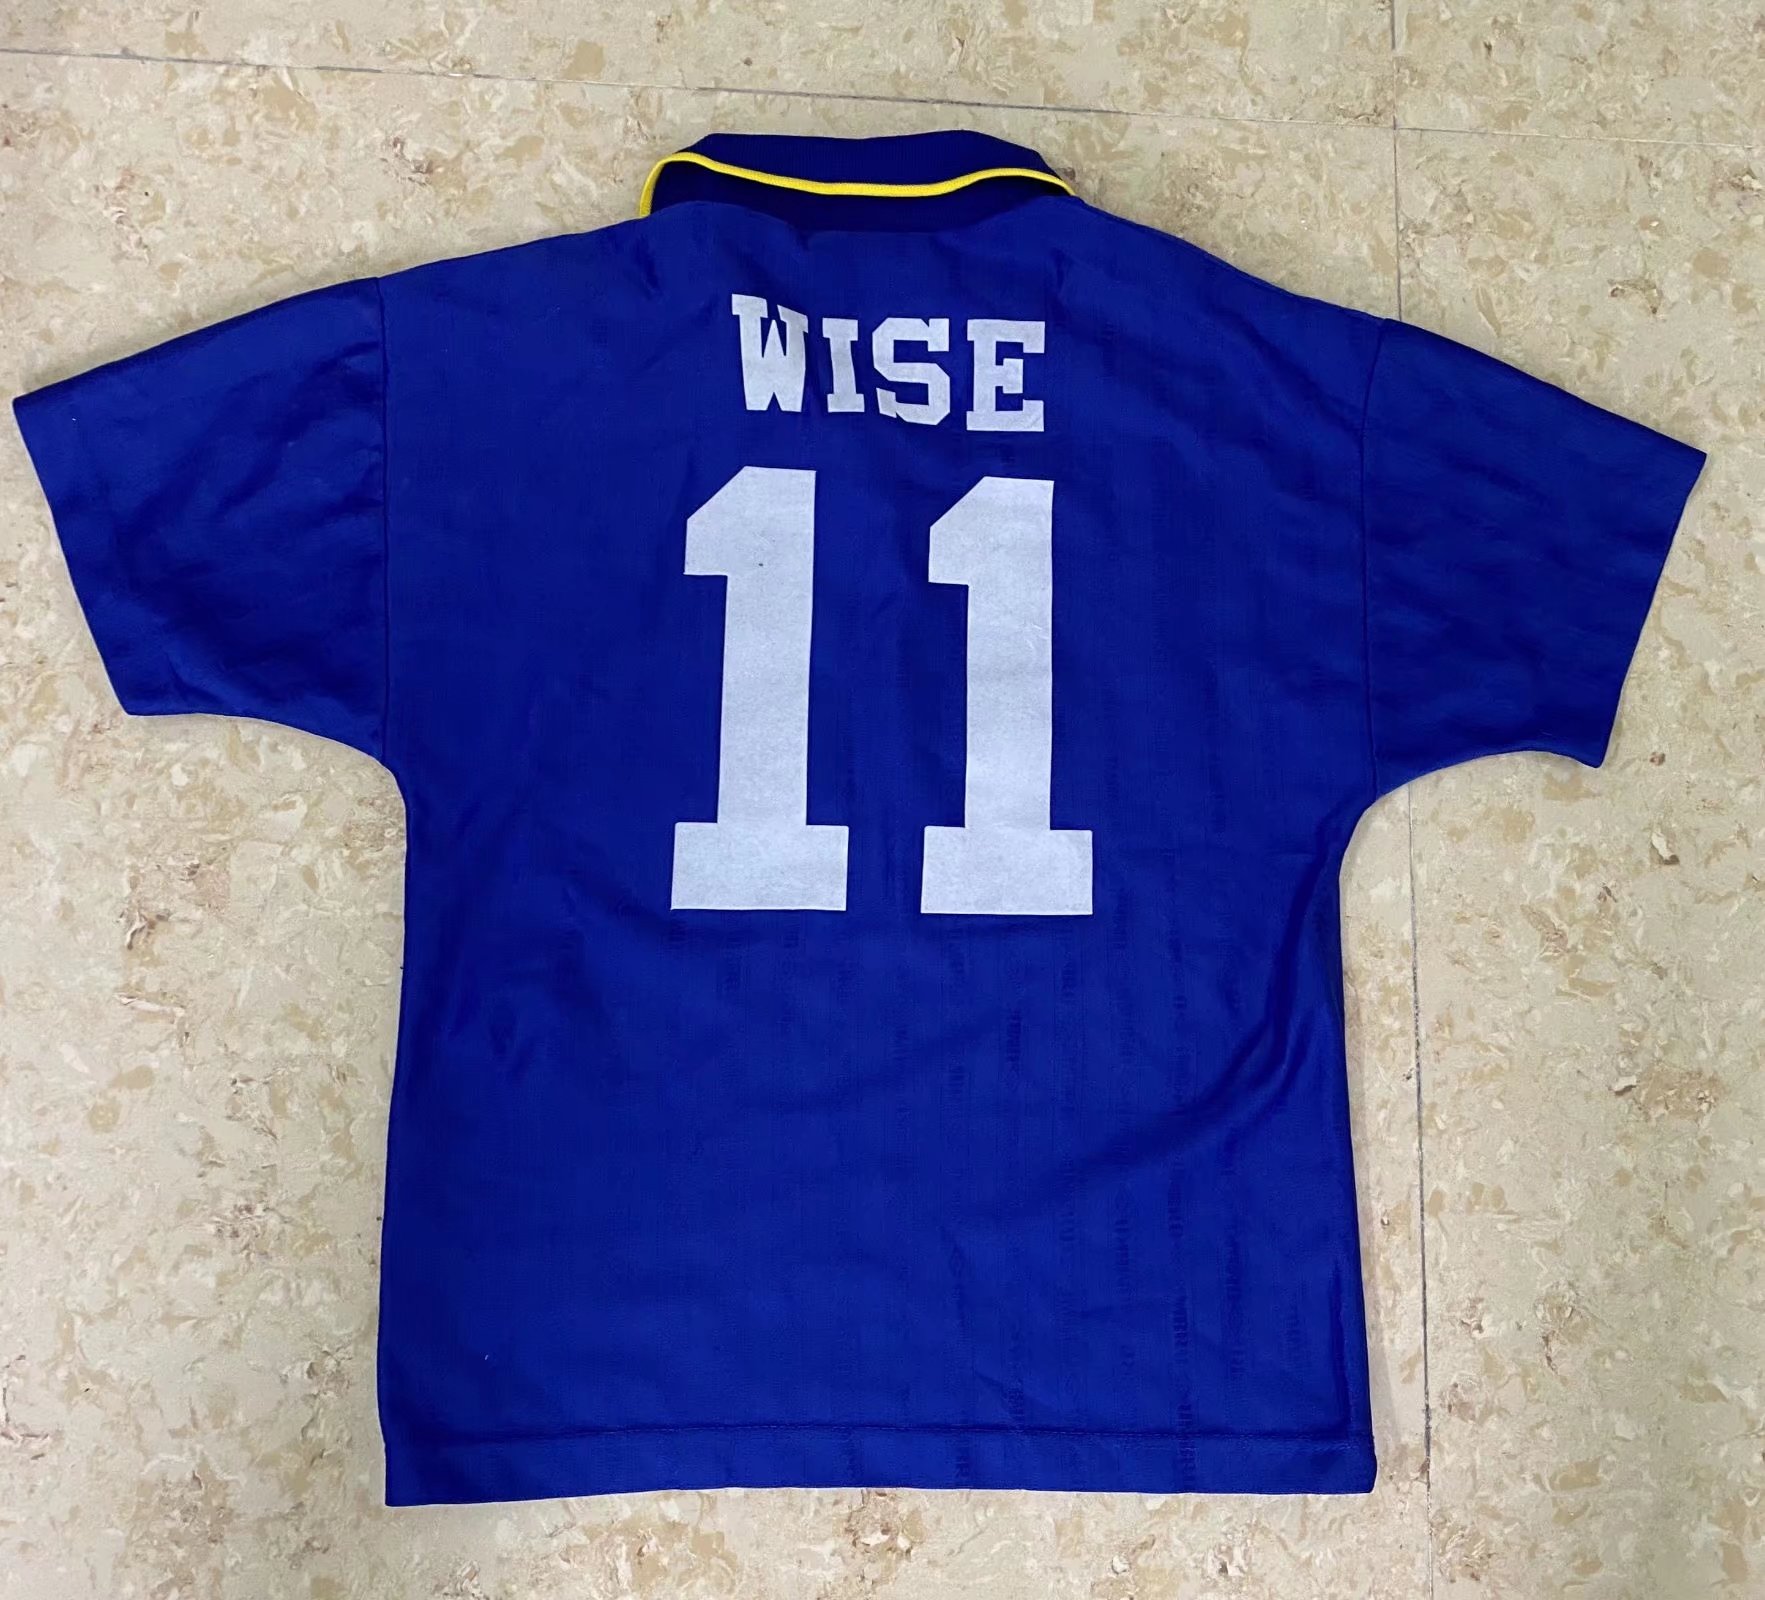 95-97 Retro Version Chelsea Home Blue #11(WISE) Thailand Soccer Jersey AAA-1041